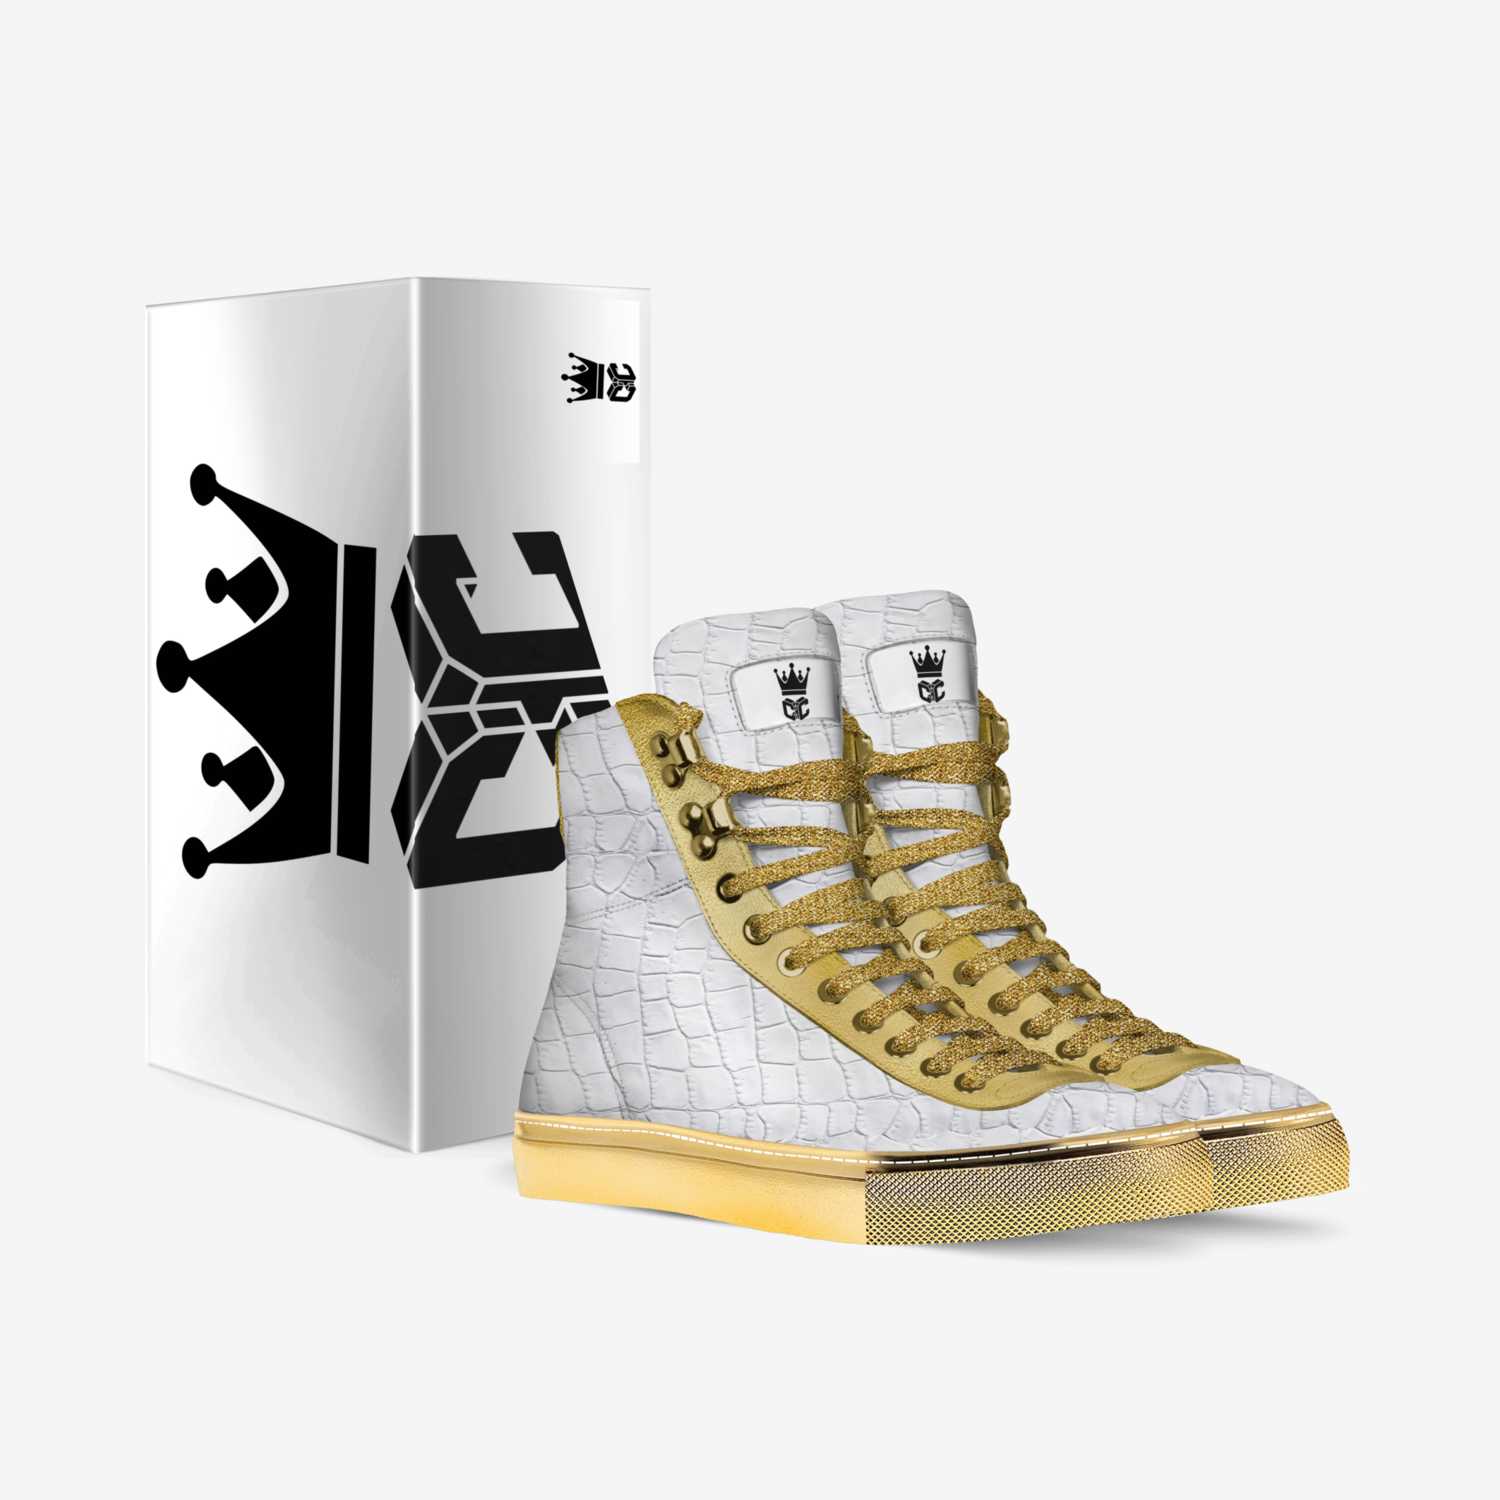 Tha Spice - White custom made in Italy shoes by Jay Classik | Box view